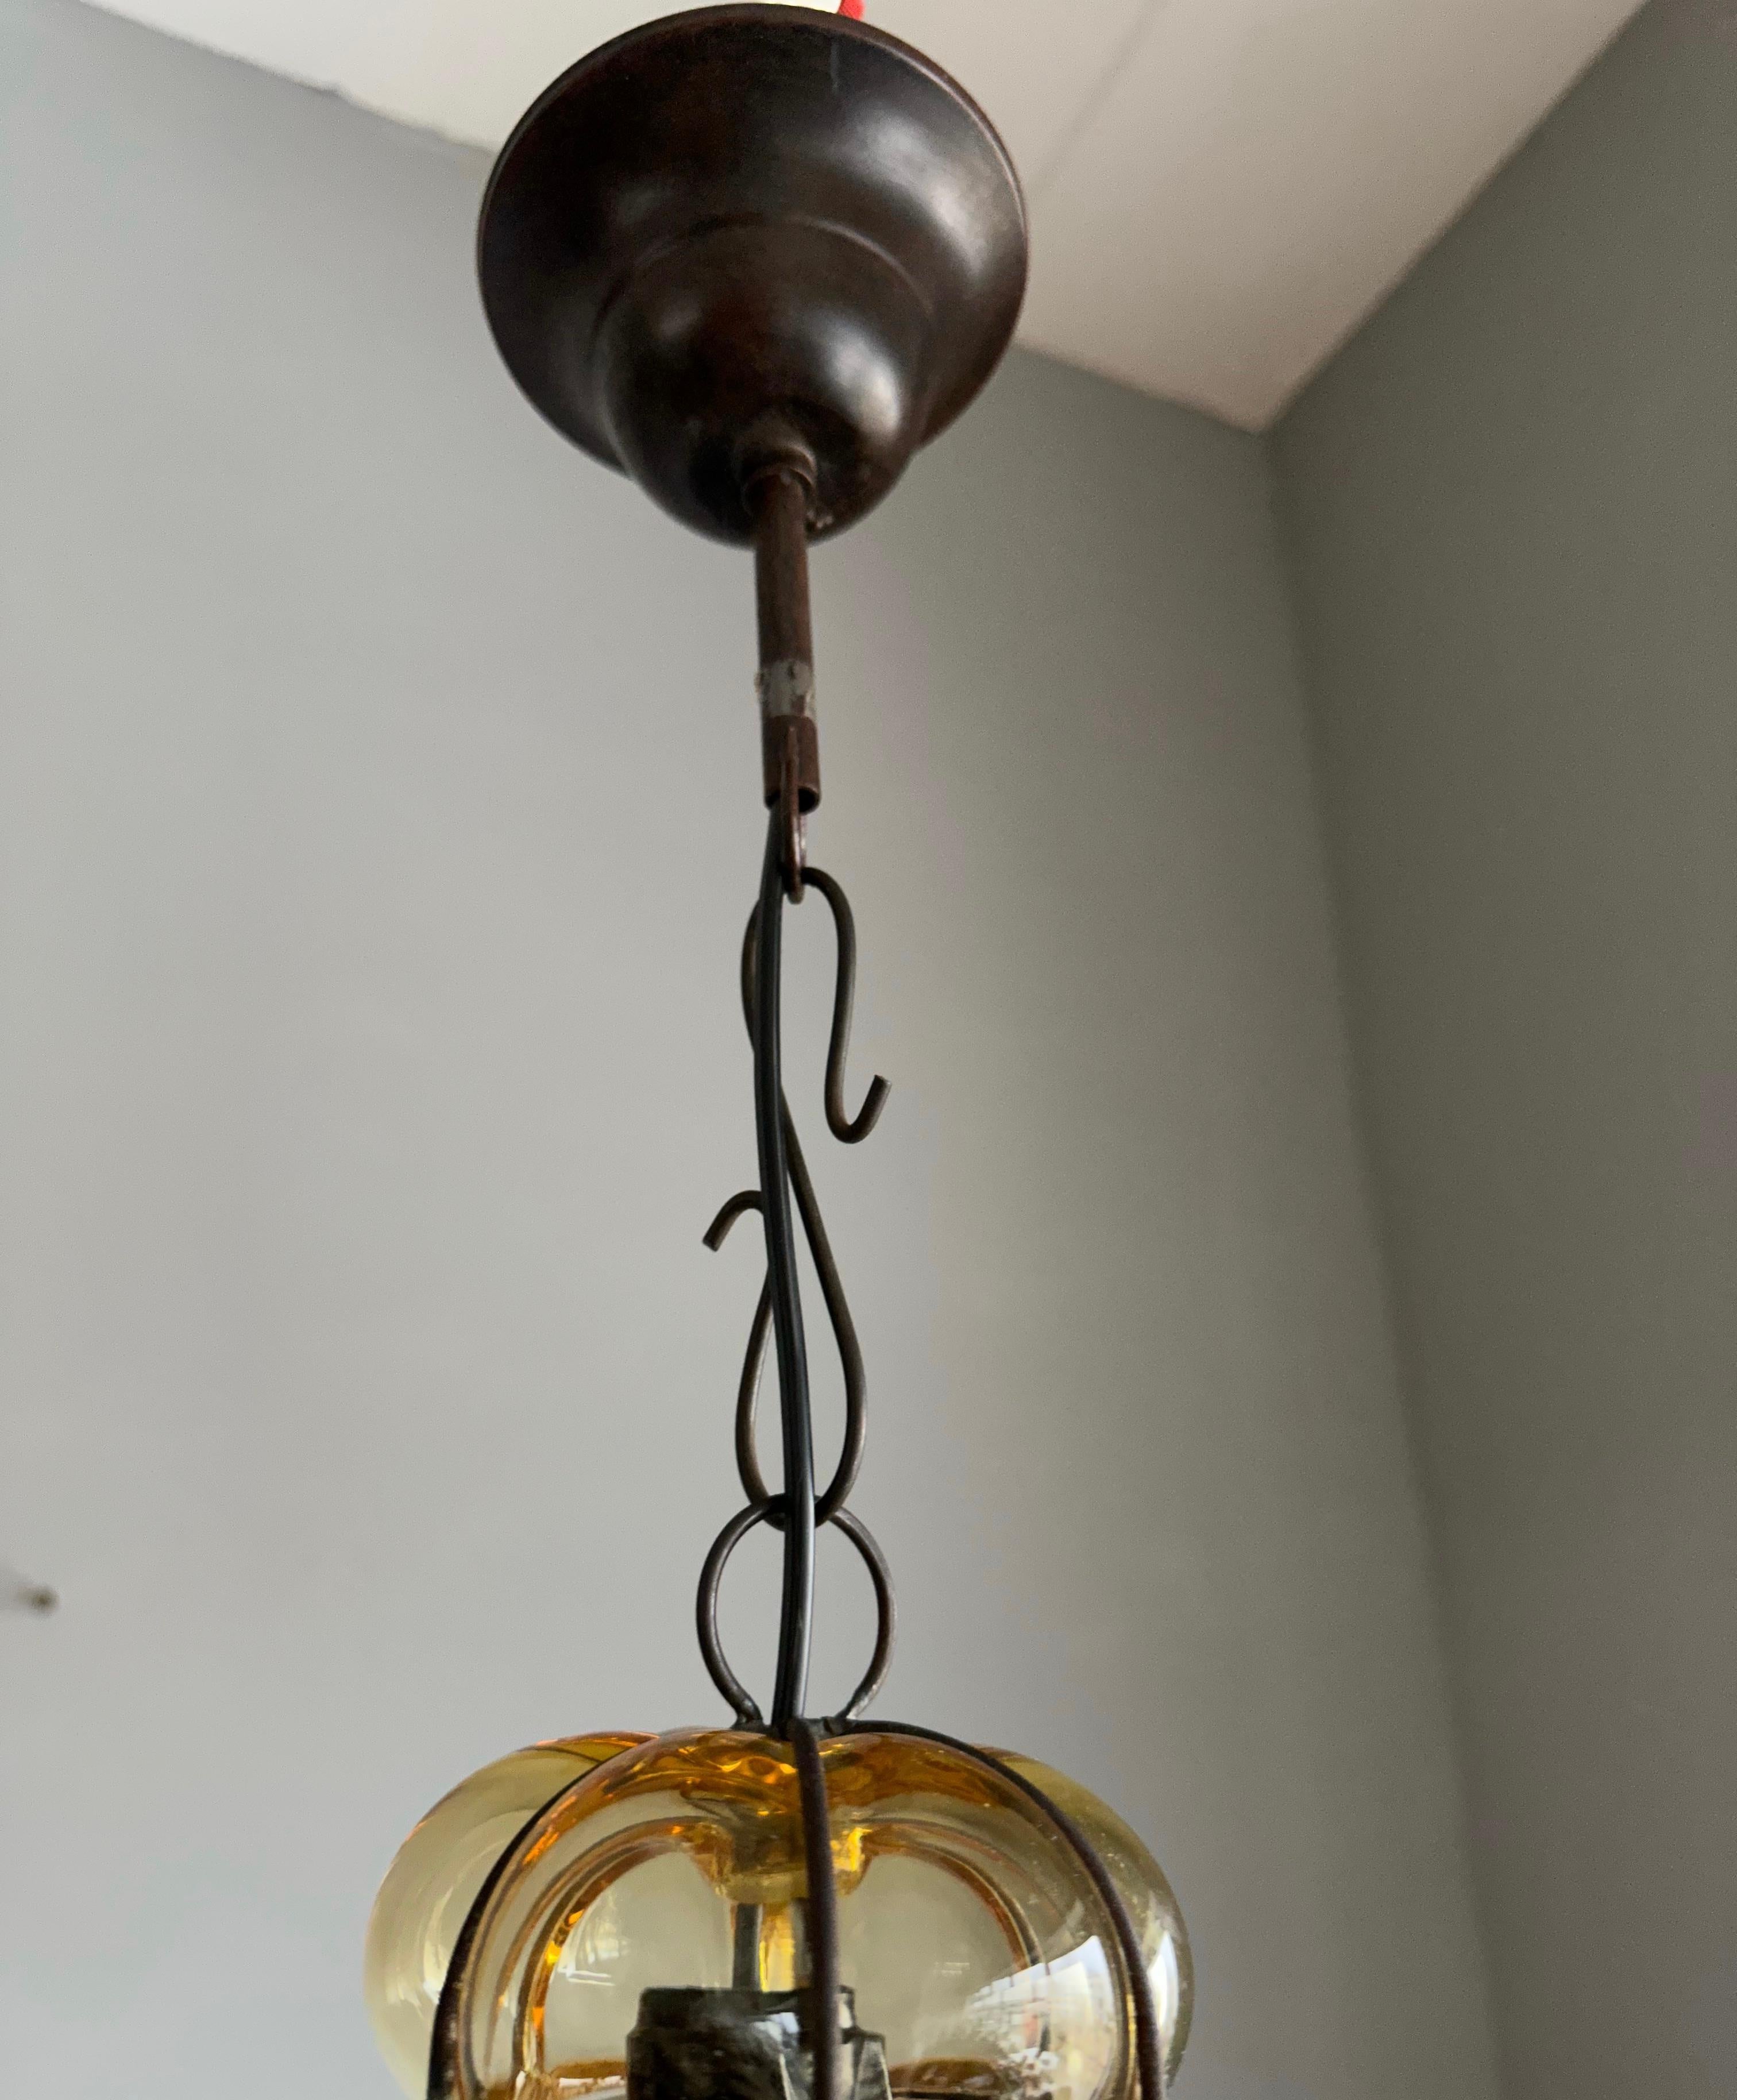 Blown Glass Antique Venetian Murano Pendant Light, Mouth Blown Smoked Glass in iron Frame